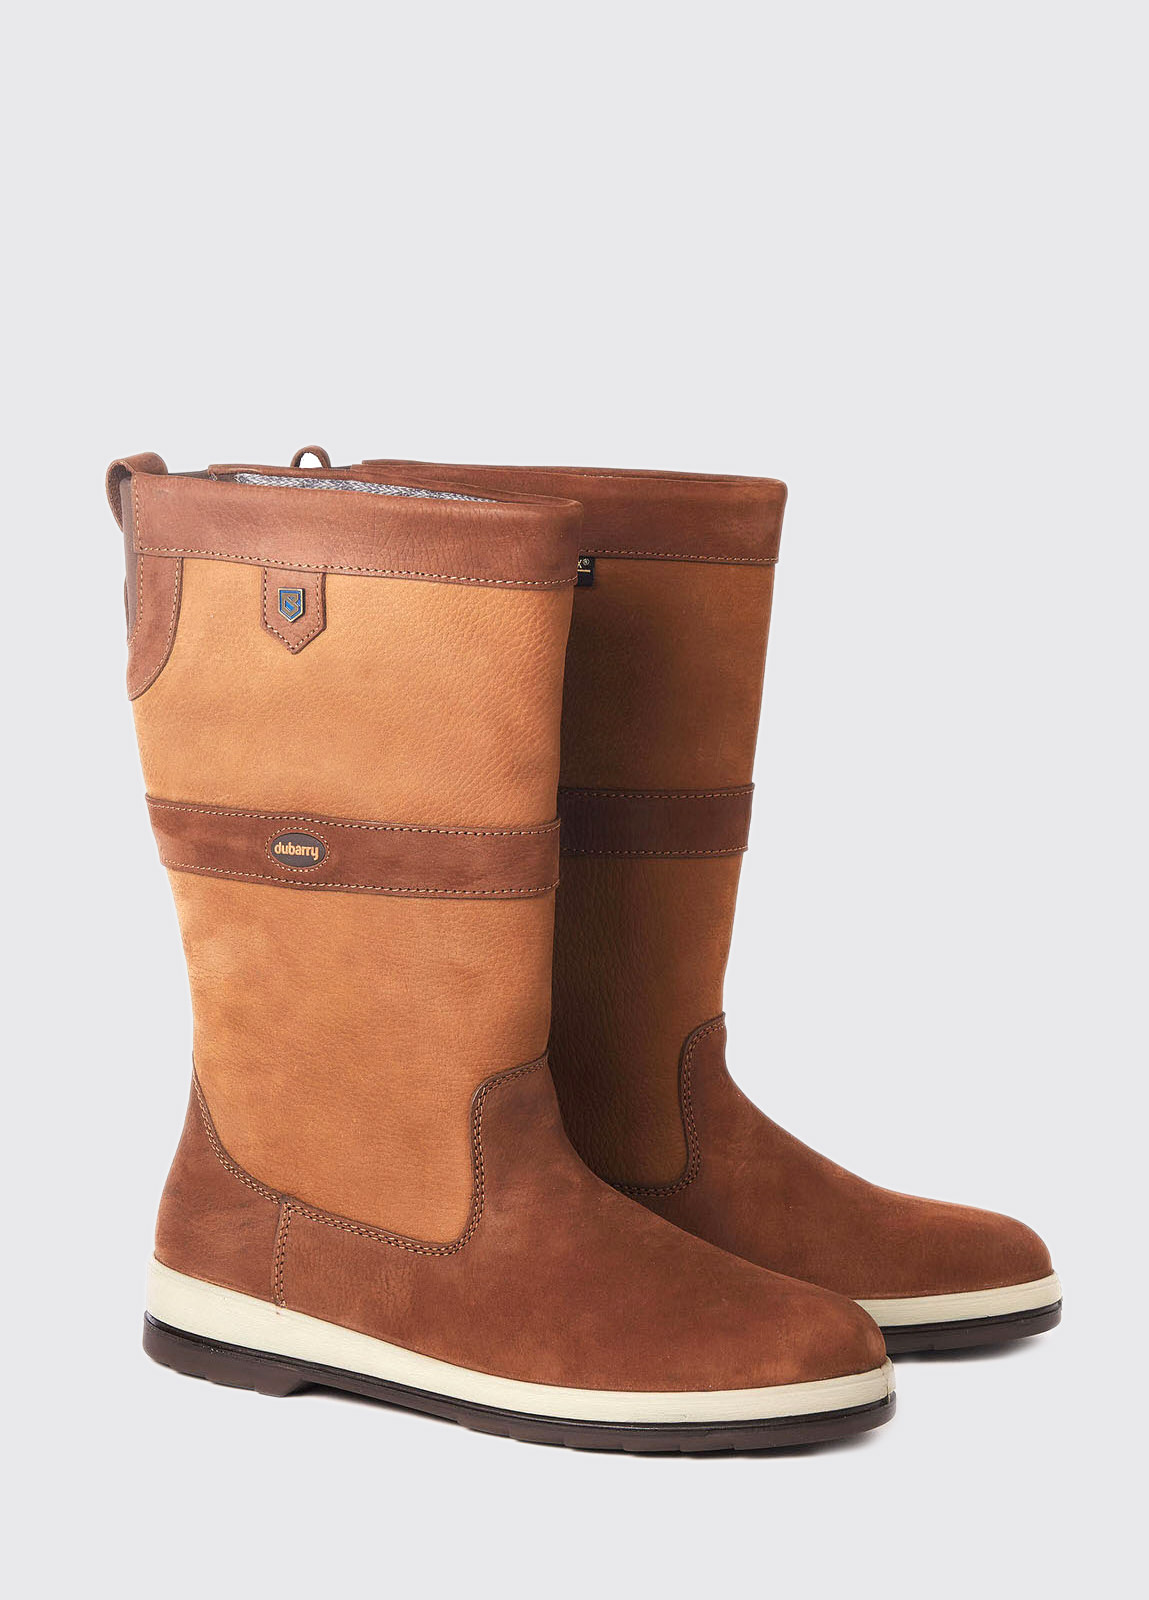 Ultima Brown Sailing Boots | Dubarry IE